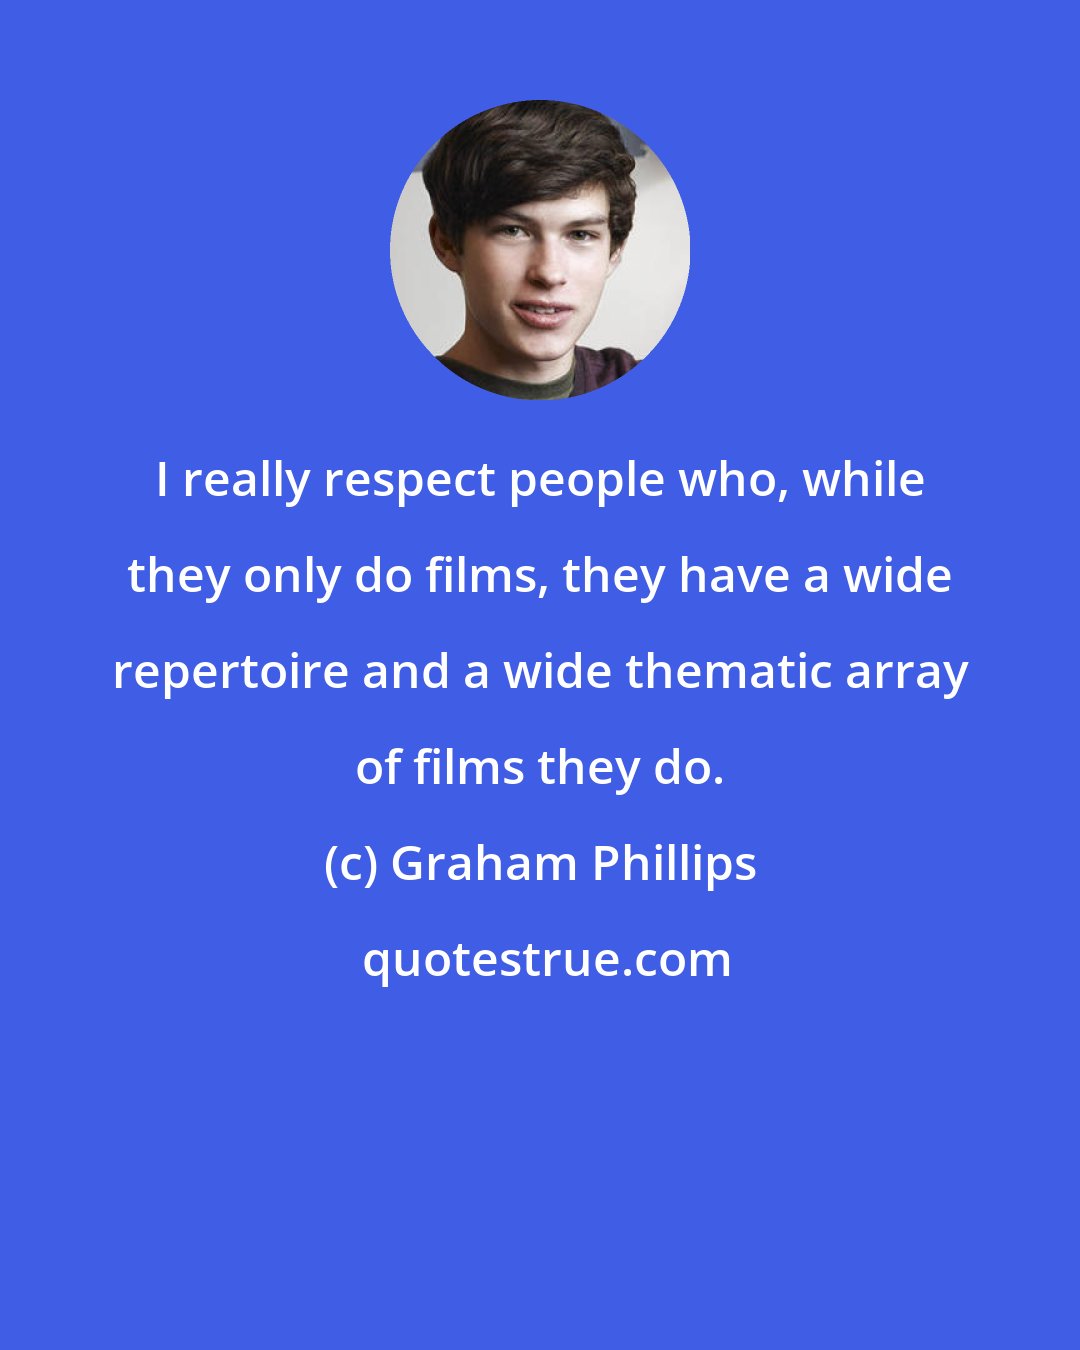 Graham Phillips: I really respect people who, while they only do films, they have a wide repertoire and a wide thematic array of films they do.